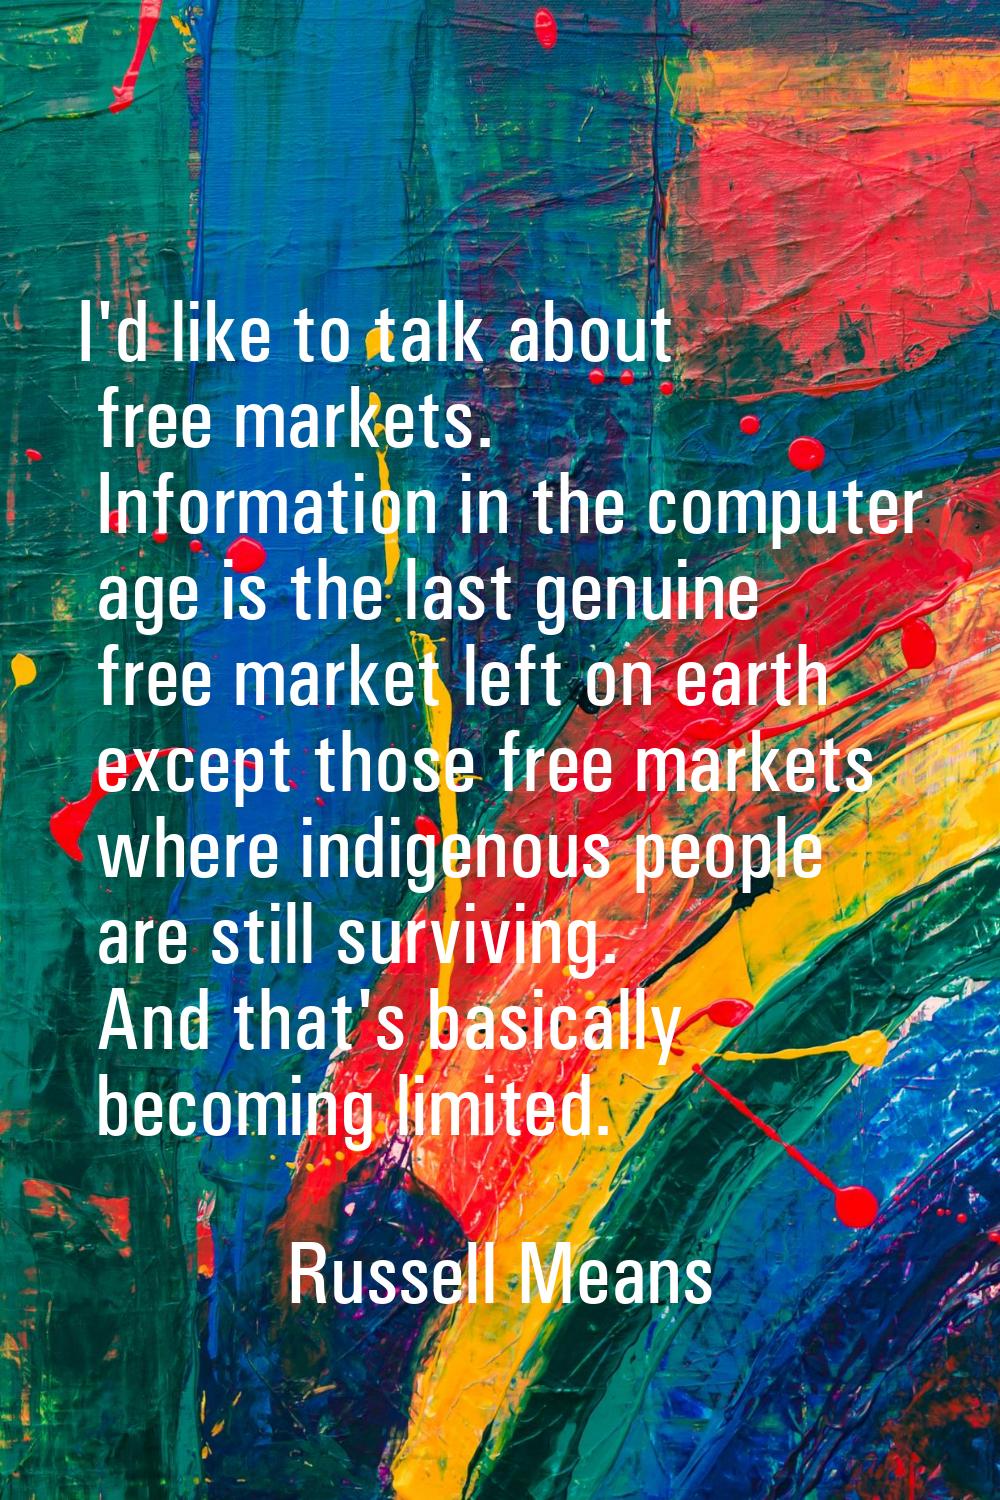 I'd like to talk about free markets. Information in the computer age is the last genuine free marke